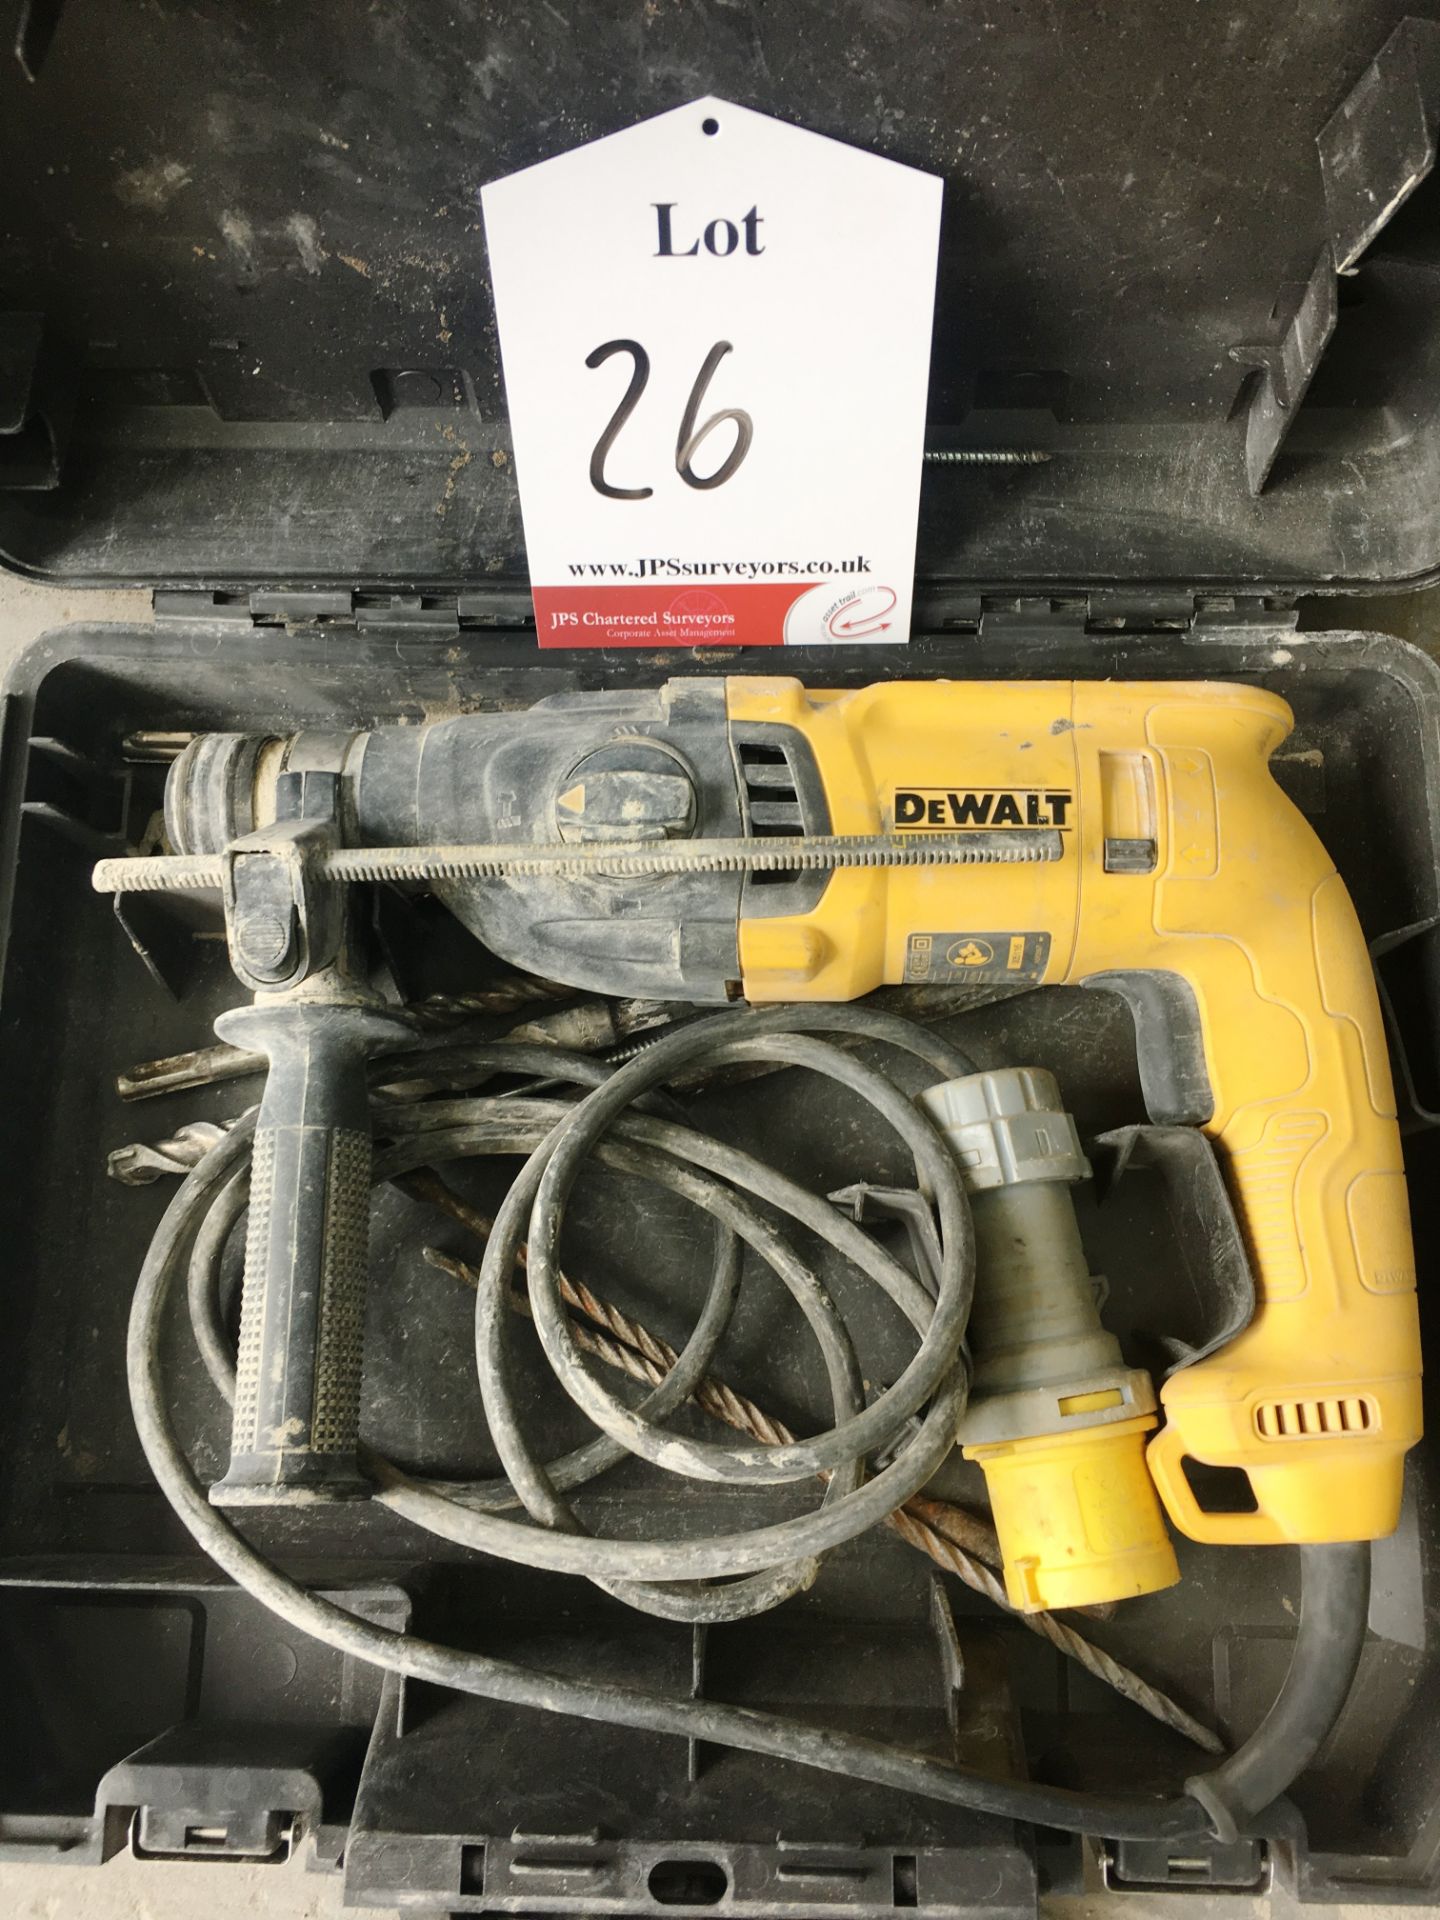 Dewalt D25033-SFLX Corded SDS Plus Drill w/ Case - Single Phase - Image 2 of 3